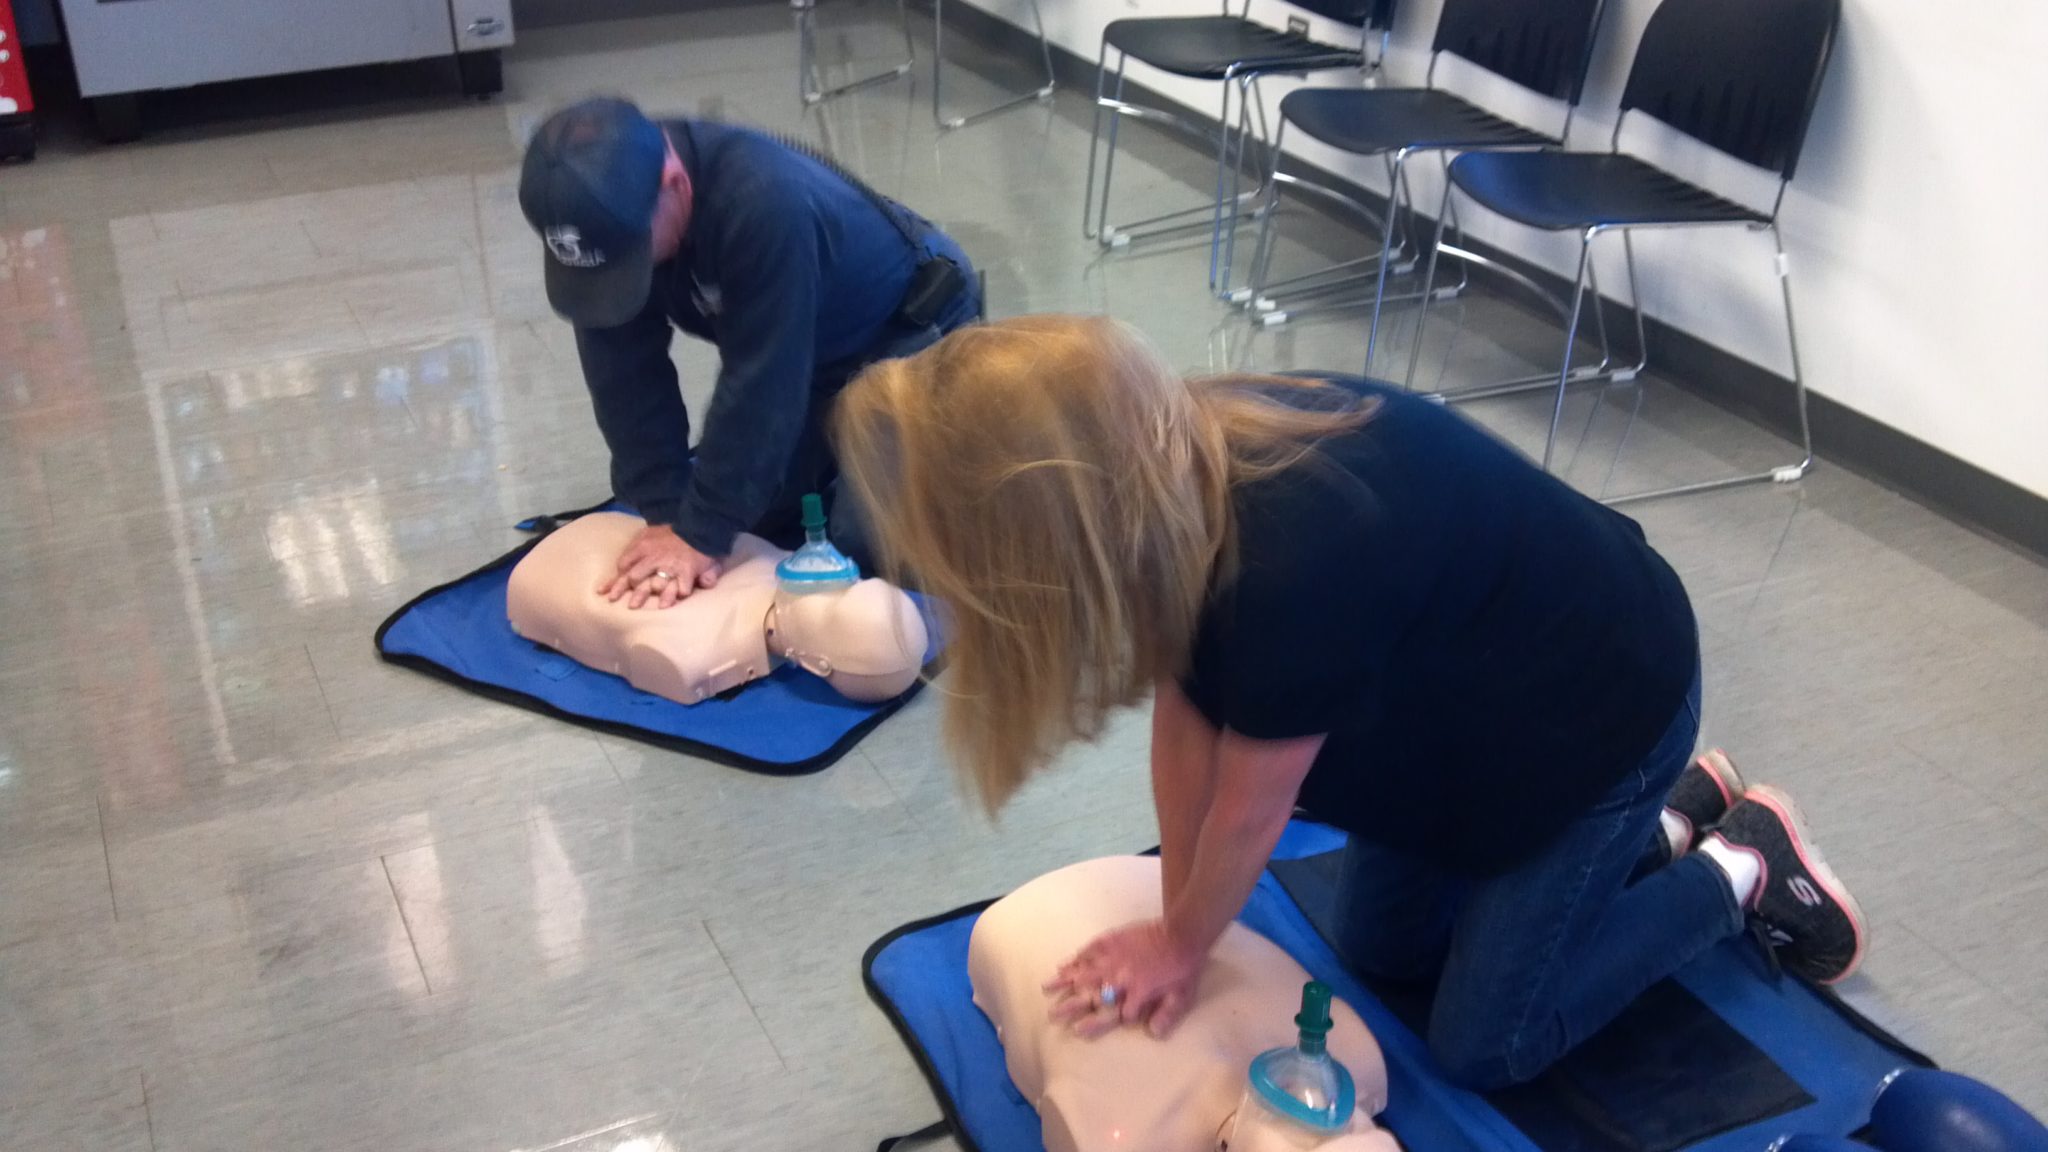 acls skills check off near me